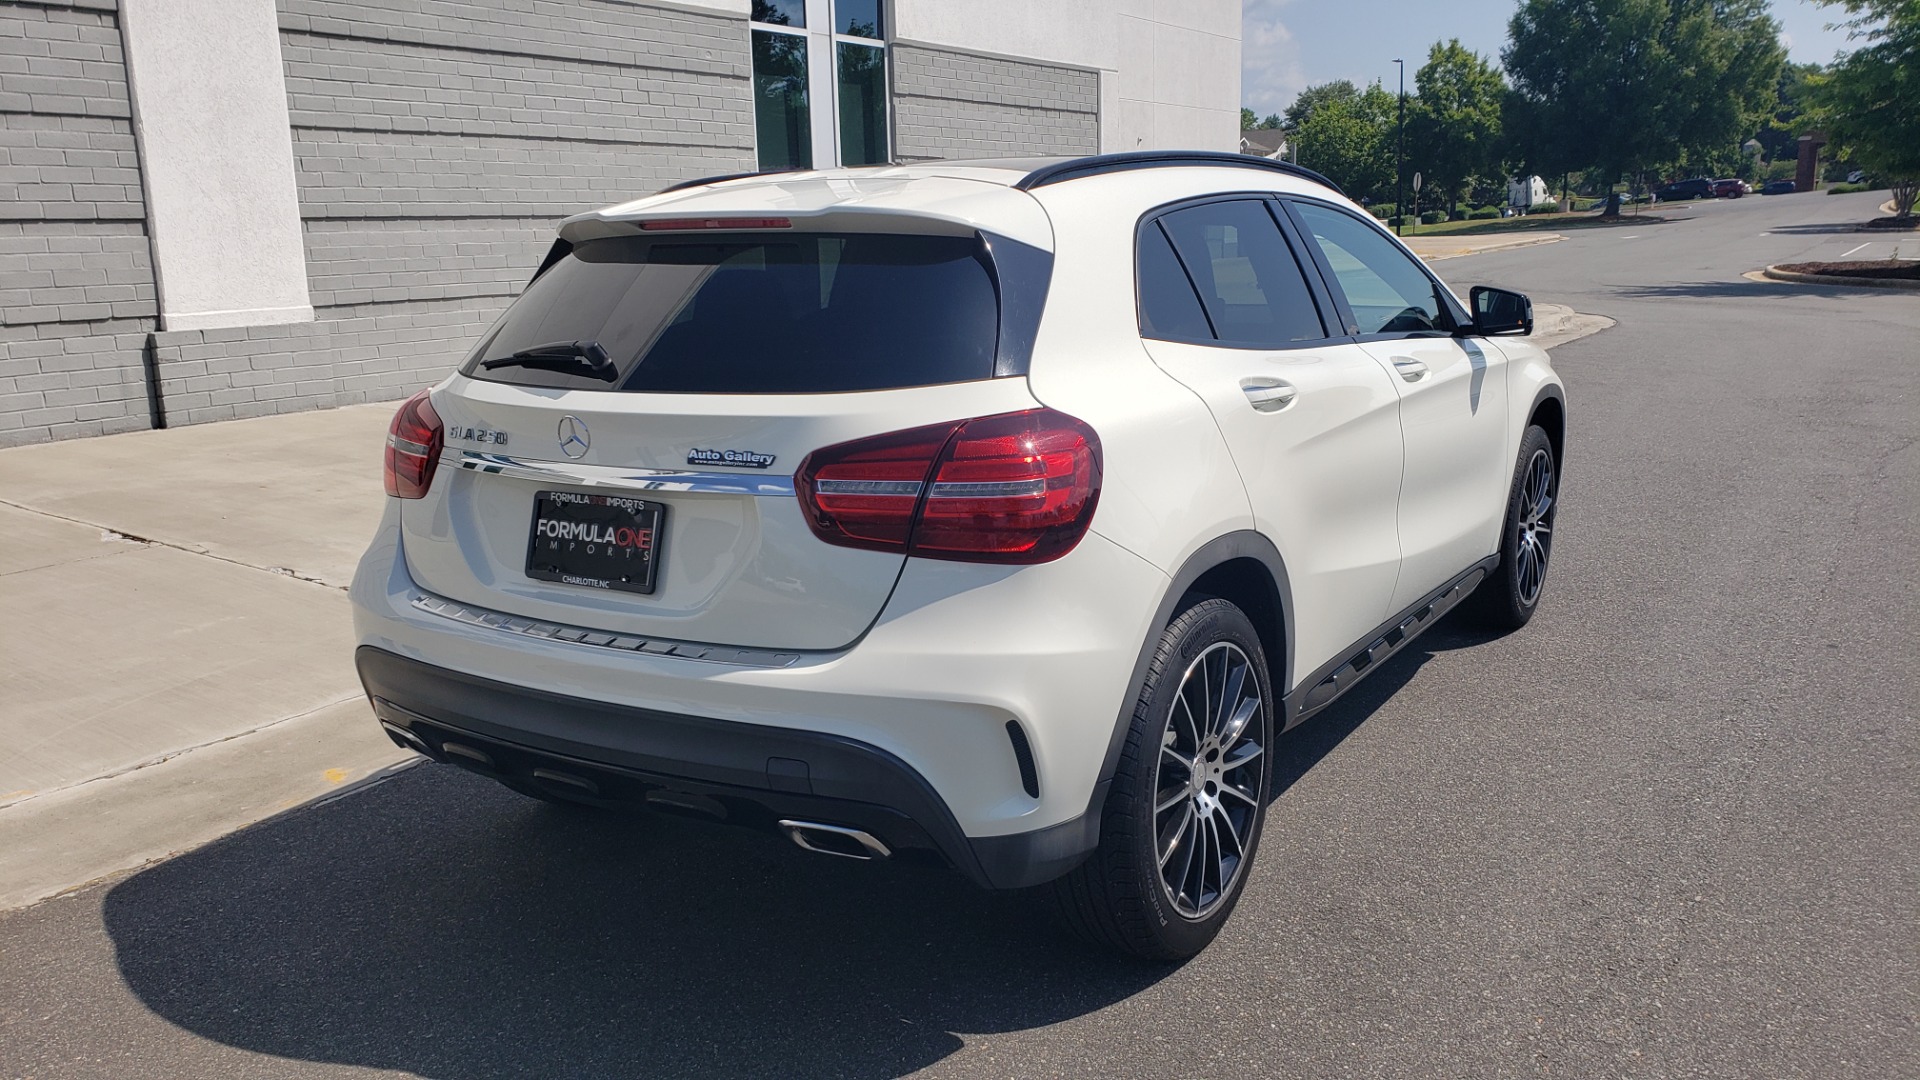 Used 2018 Mercedes-Benz GLA 250 / ICE EDITION / 2.0L / 7-SPD AUTO / SUNROOF / REARVIEW for sale Sold at Formula Imports in Charlotte NC 28227 2